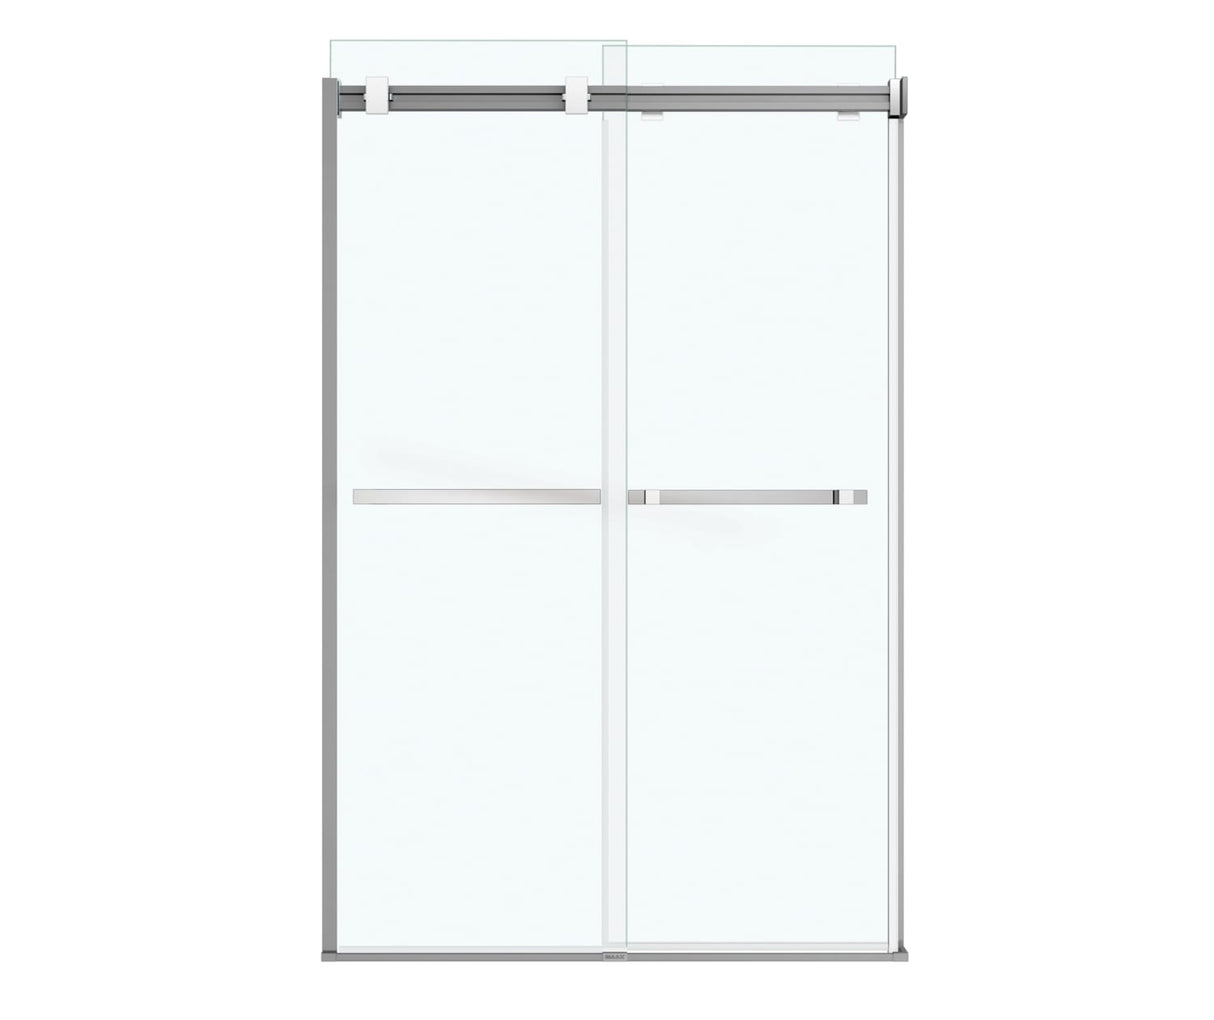 MAAX 136272-900-280-000 Duel 56-58 ½ x 70 ½-74 in. 8 mm Bypass Shower Door for Alcove Installation with Clear glass in Chrome & Matte White